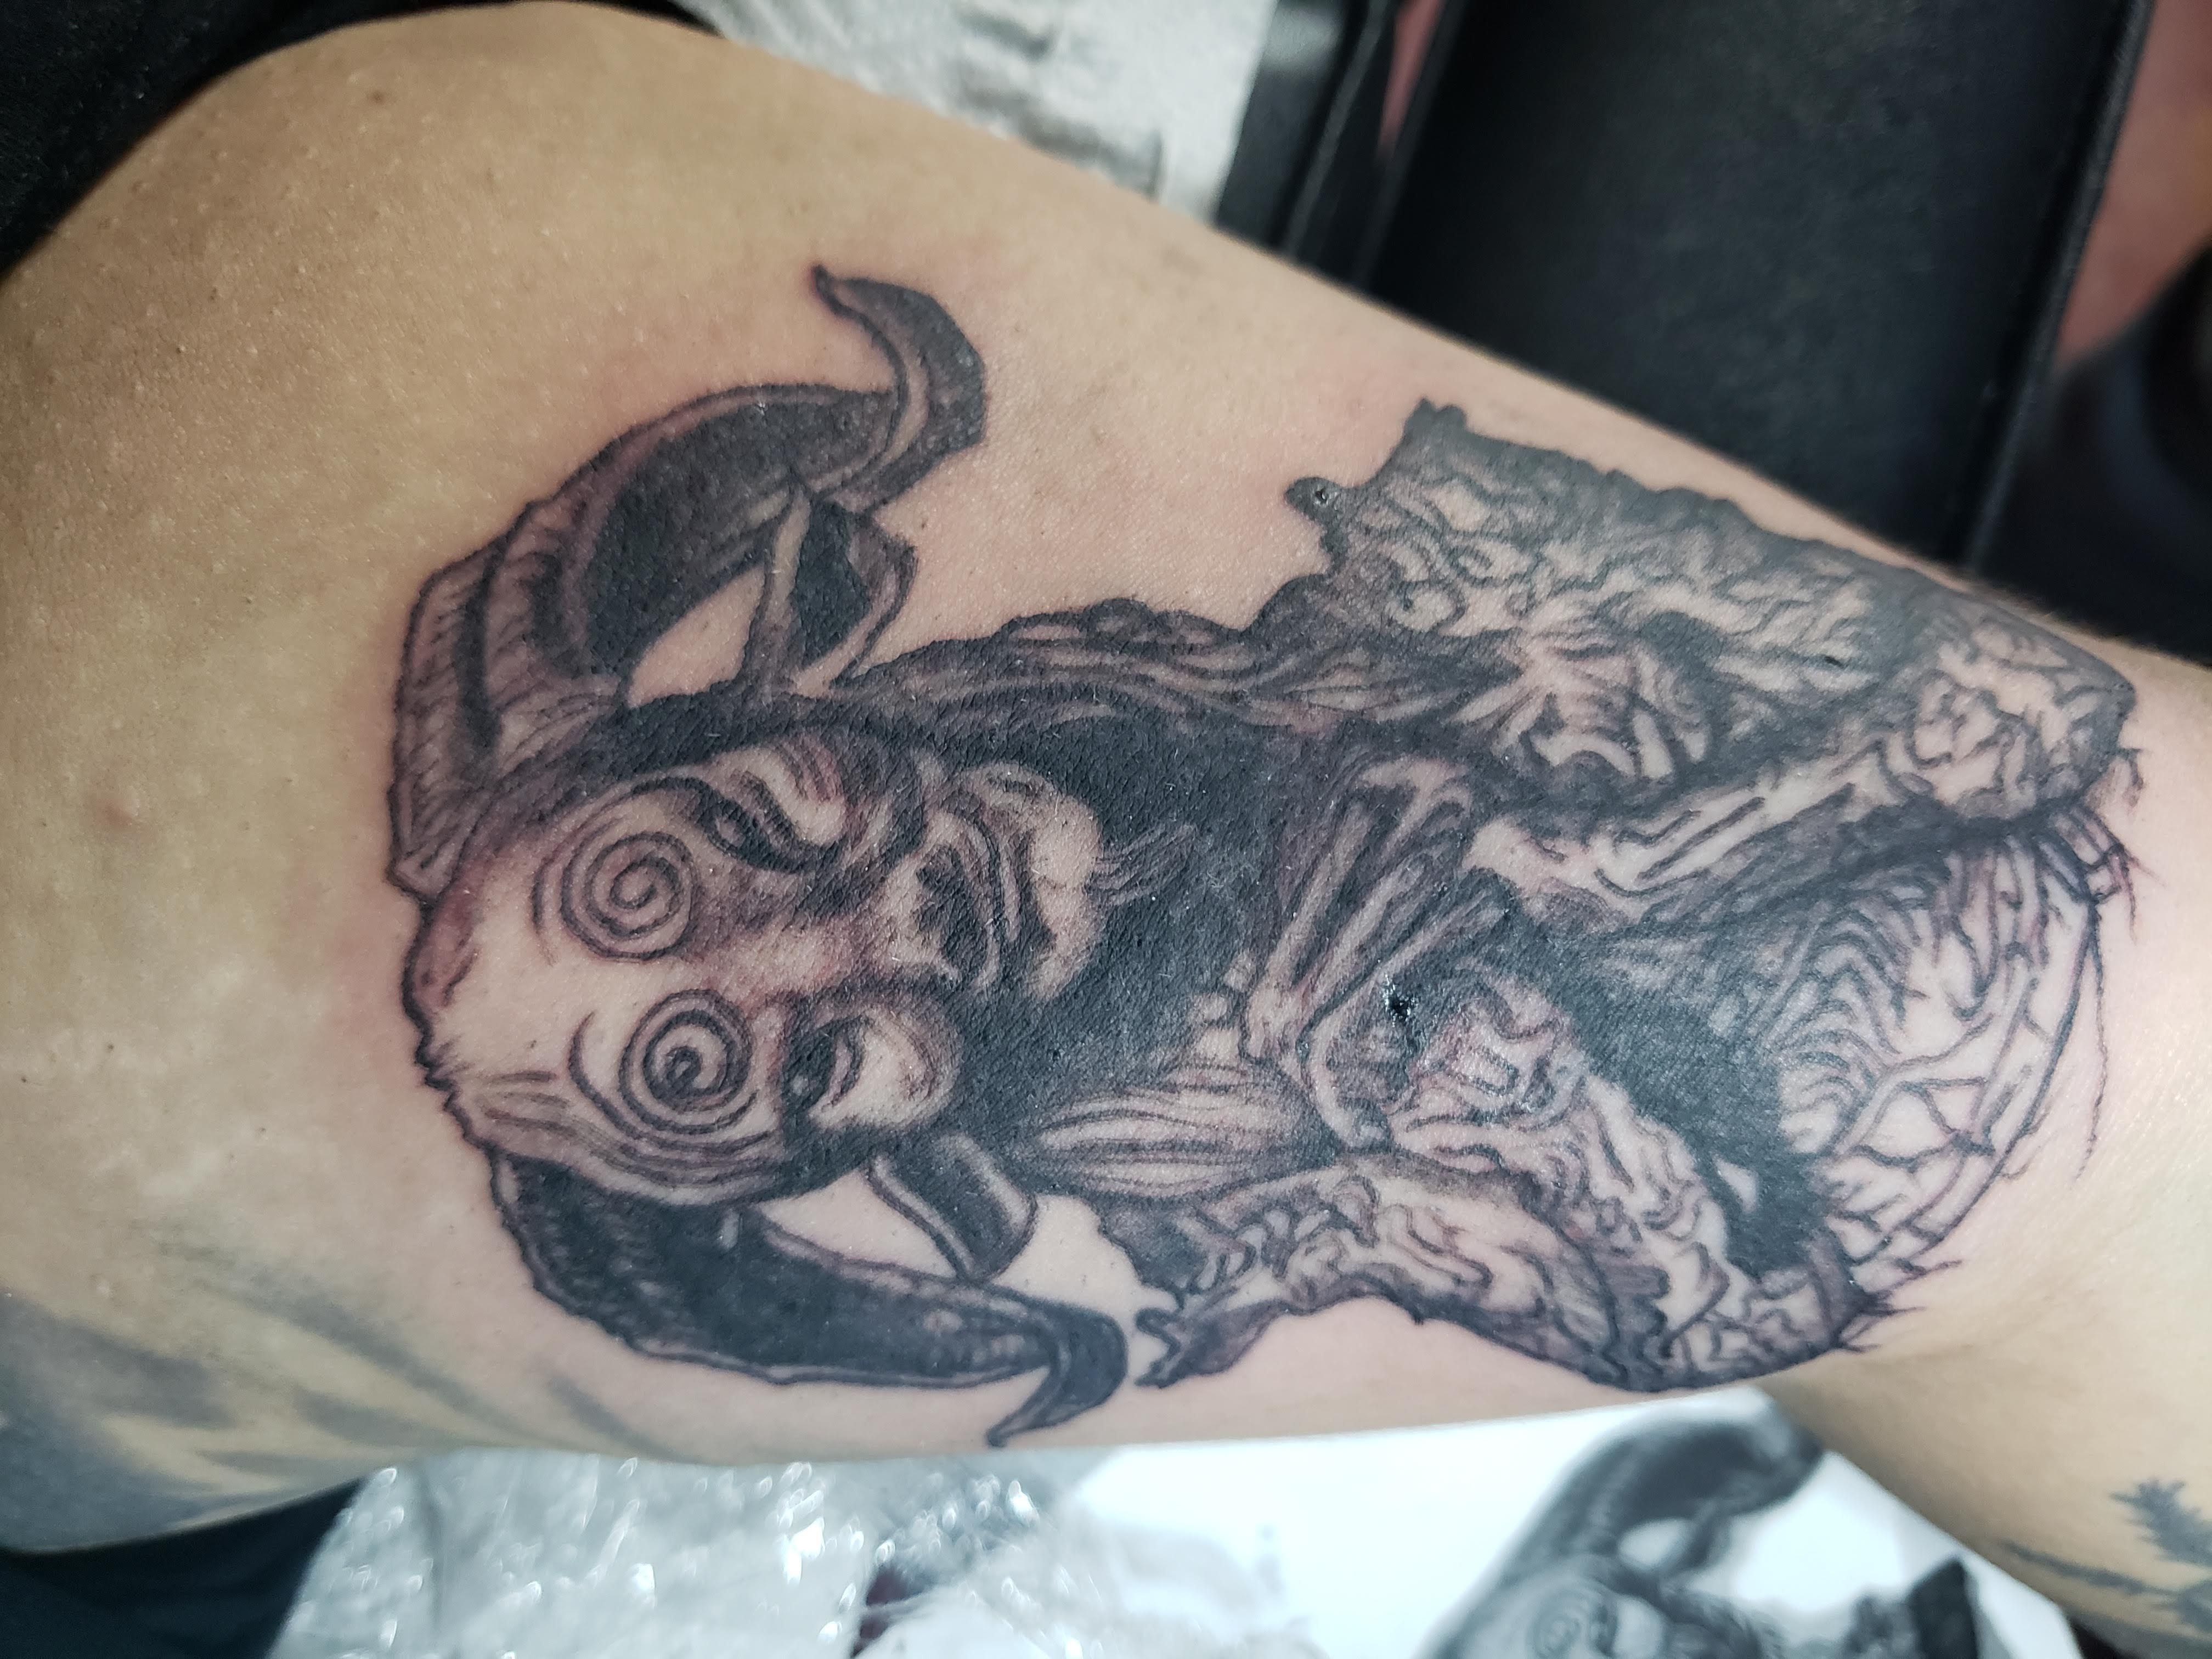 My wifes fresh Pans Labyrinth tattoo done by Tara at Mooresville Tattoo  Company Mooresville NC  rtattoo